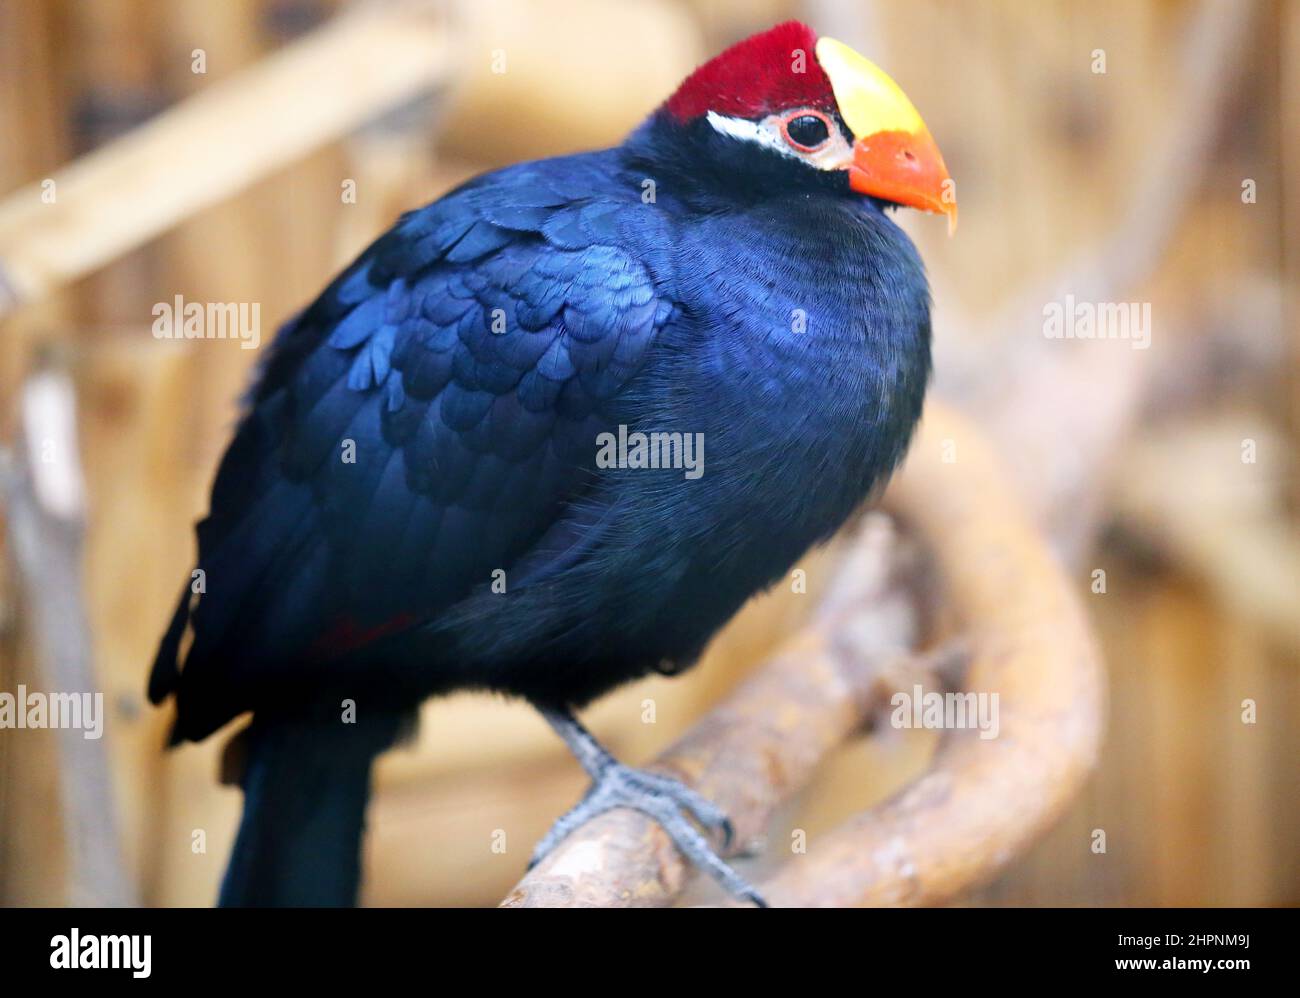 beautiful blue bird phasianidae with a red head and beak photographed in close-up Stock Photo